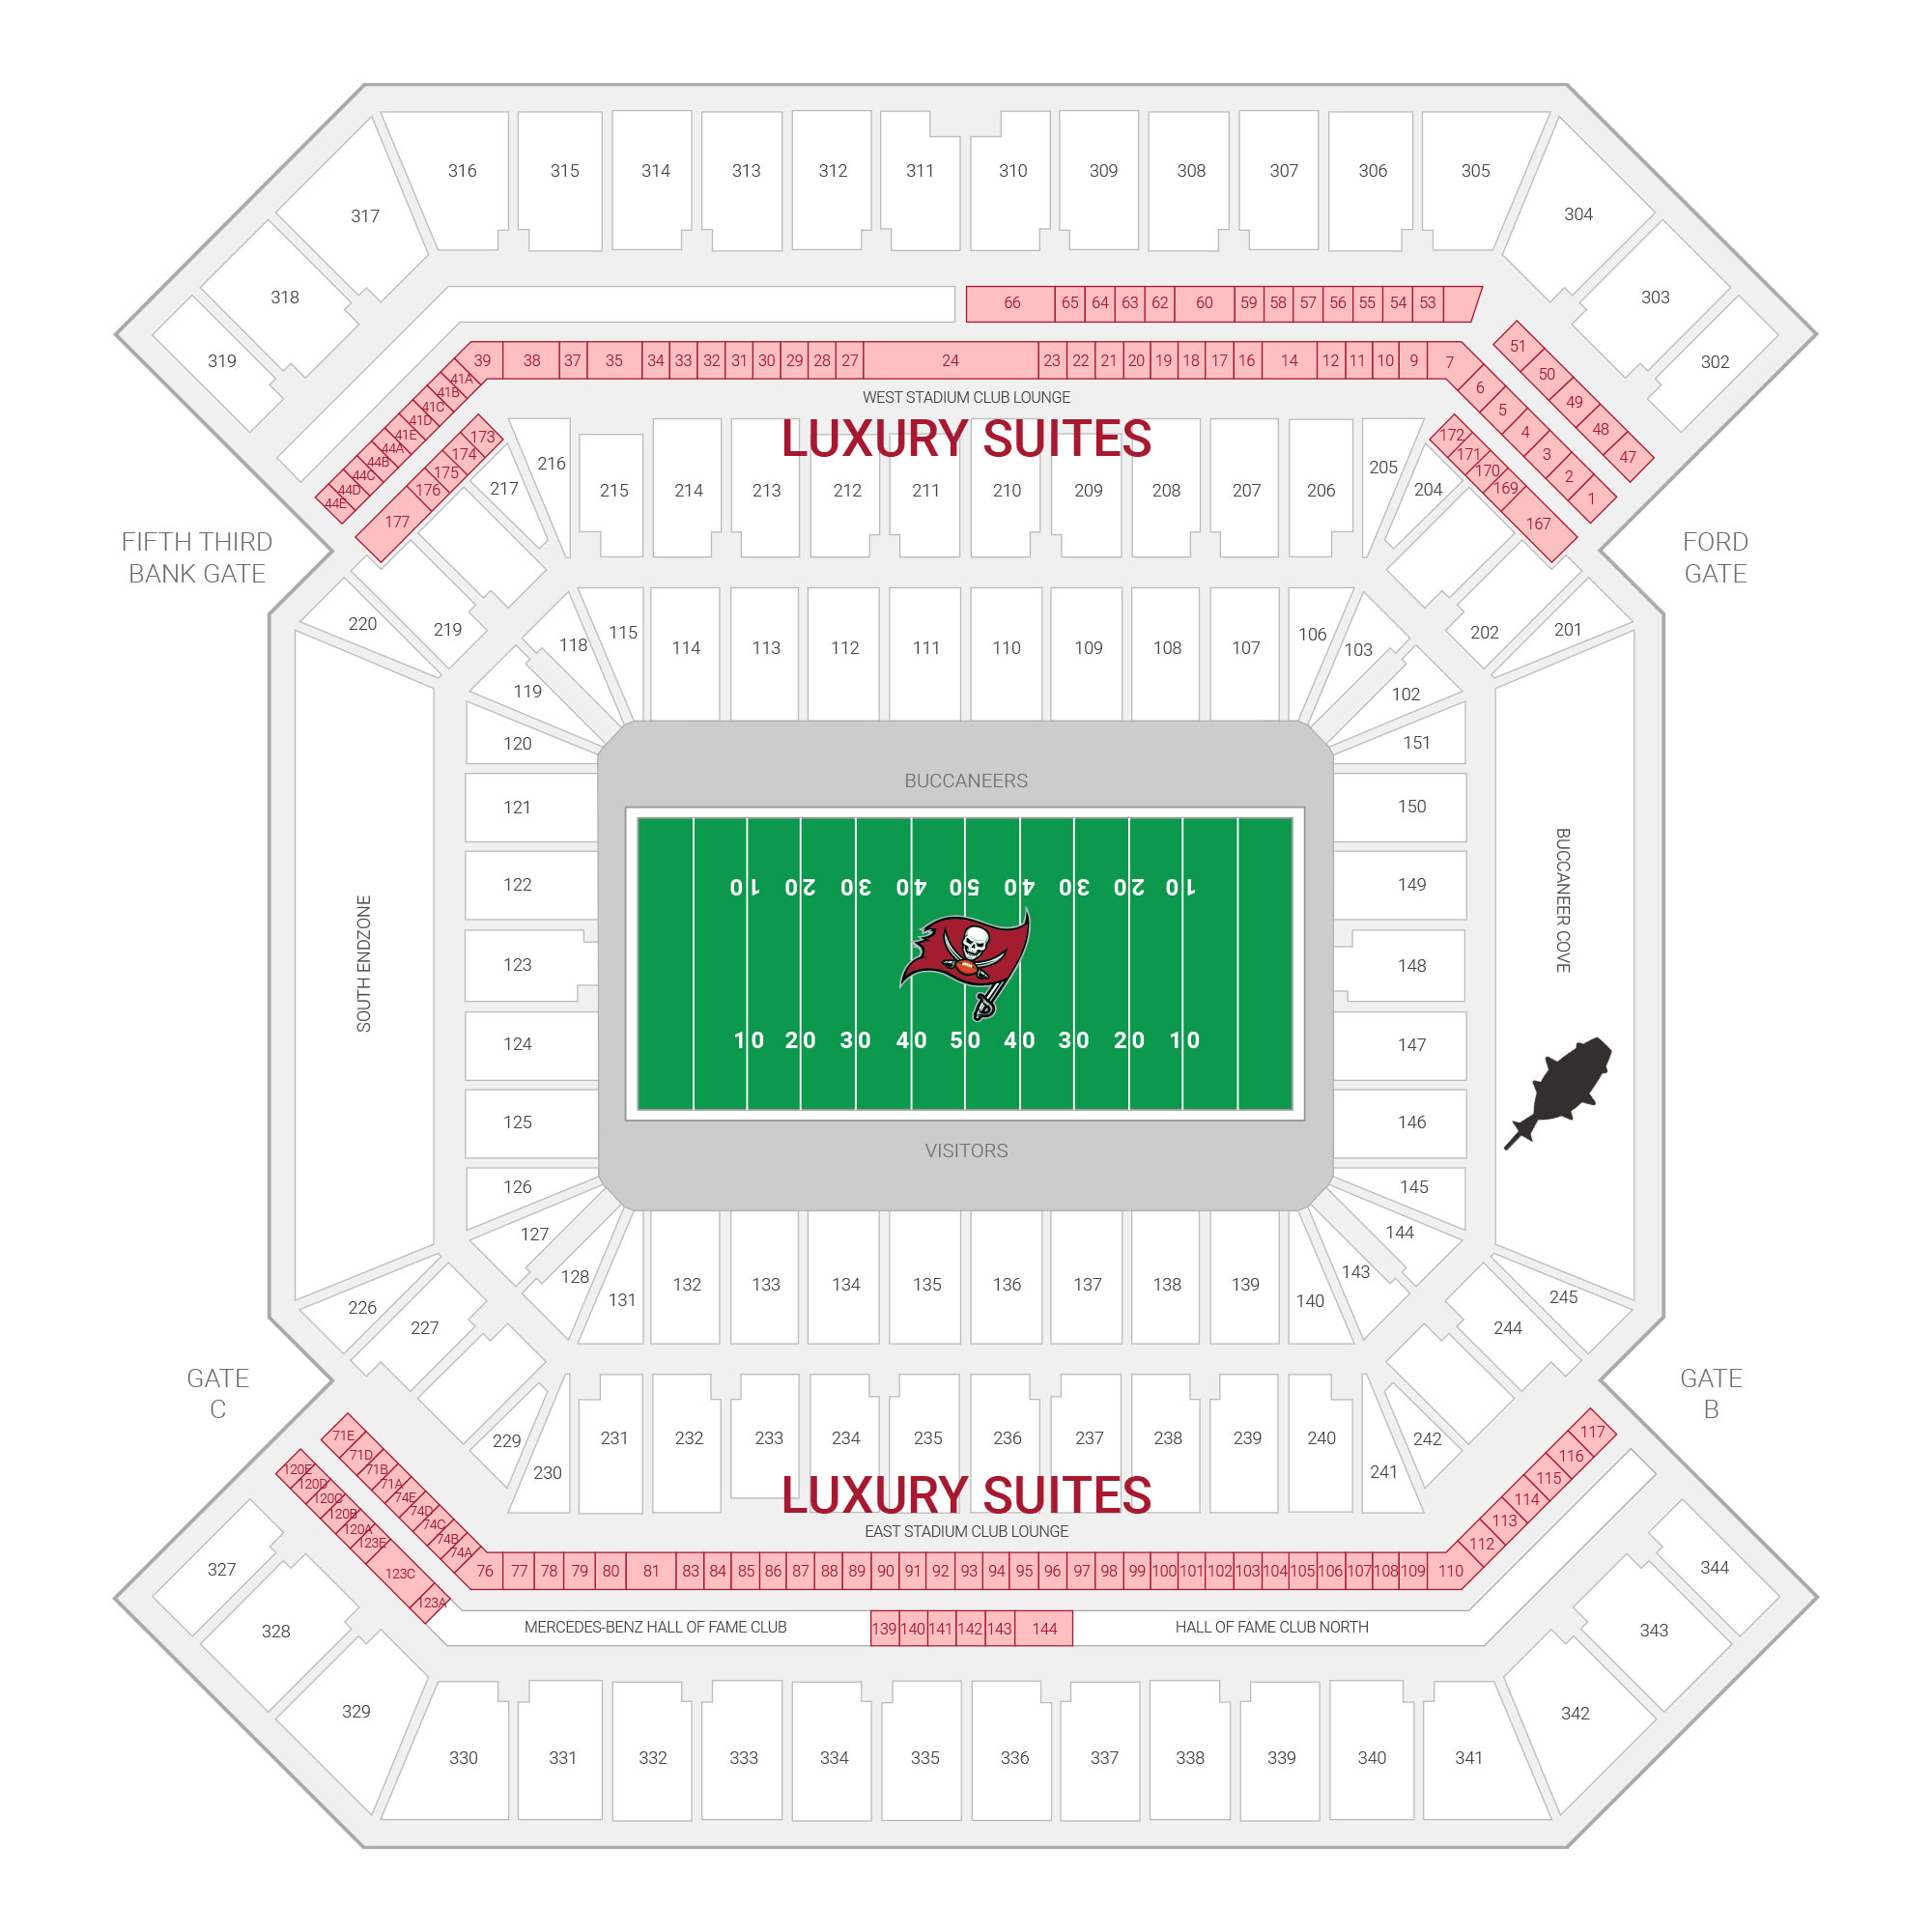 Raymond James Stadium / Tampa Bay Buccaneers Suite Map and Seating Chart